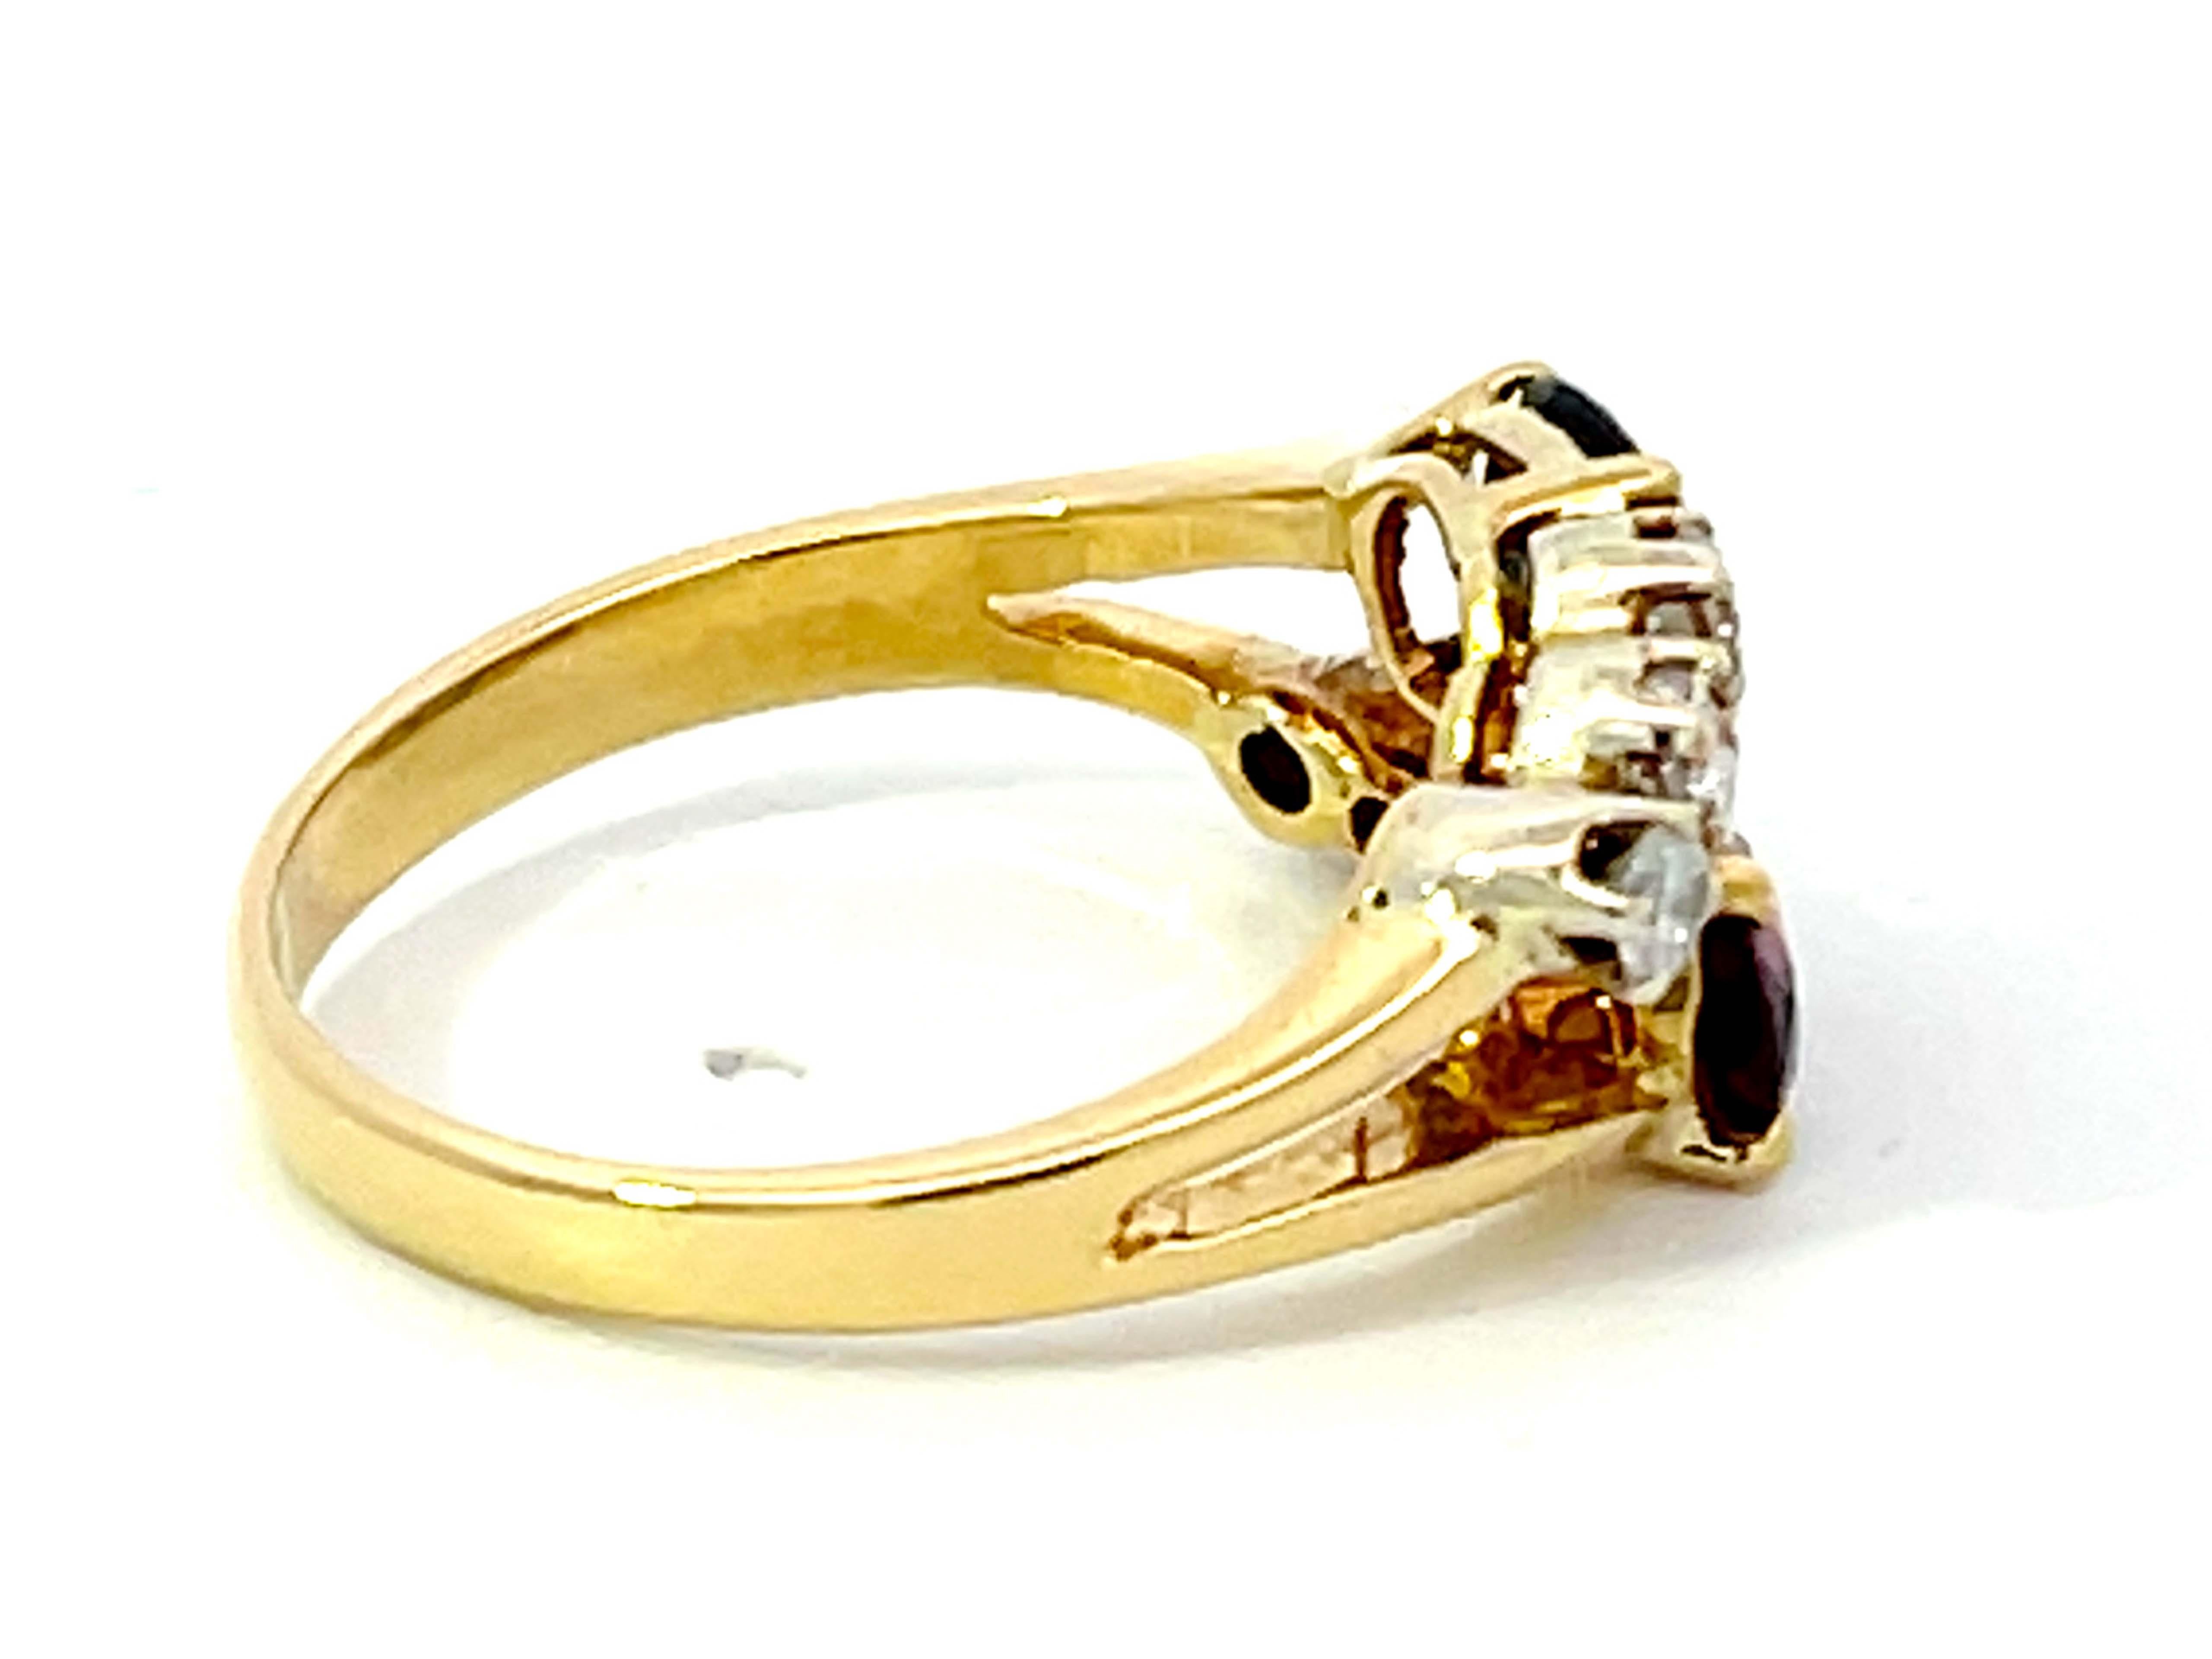 Ruby and Sapphire Diamond Ring in 14k Yellow Gold In Excellent Condition For Sale In Honolulu, HI